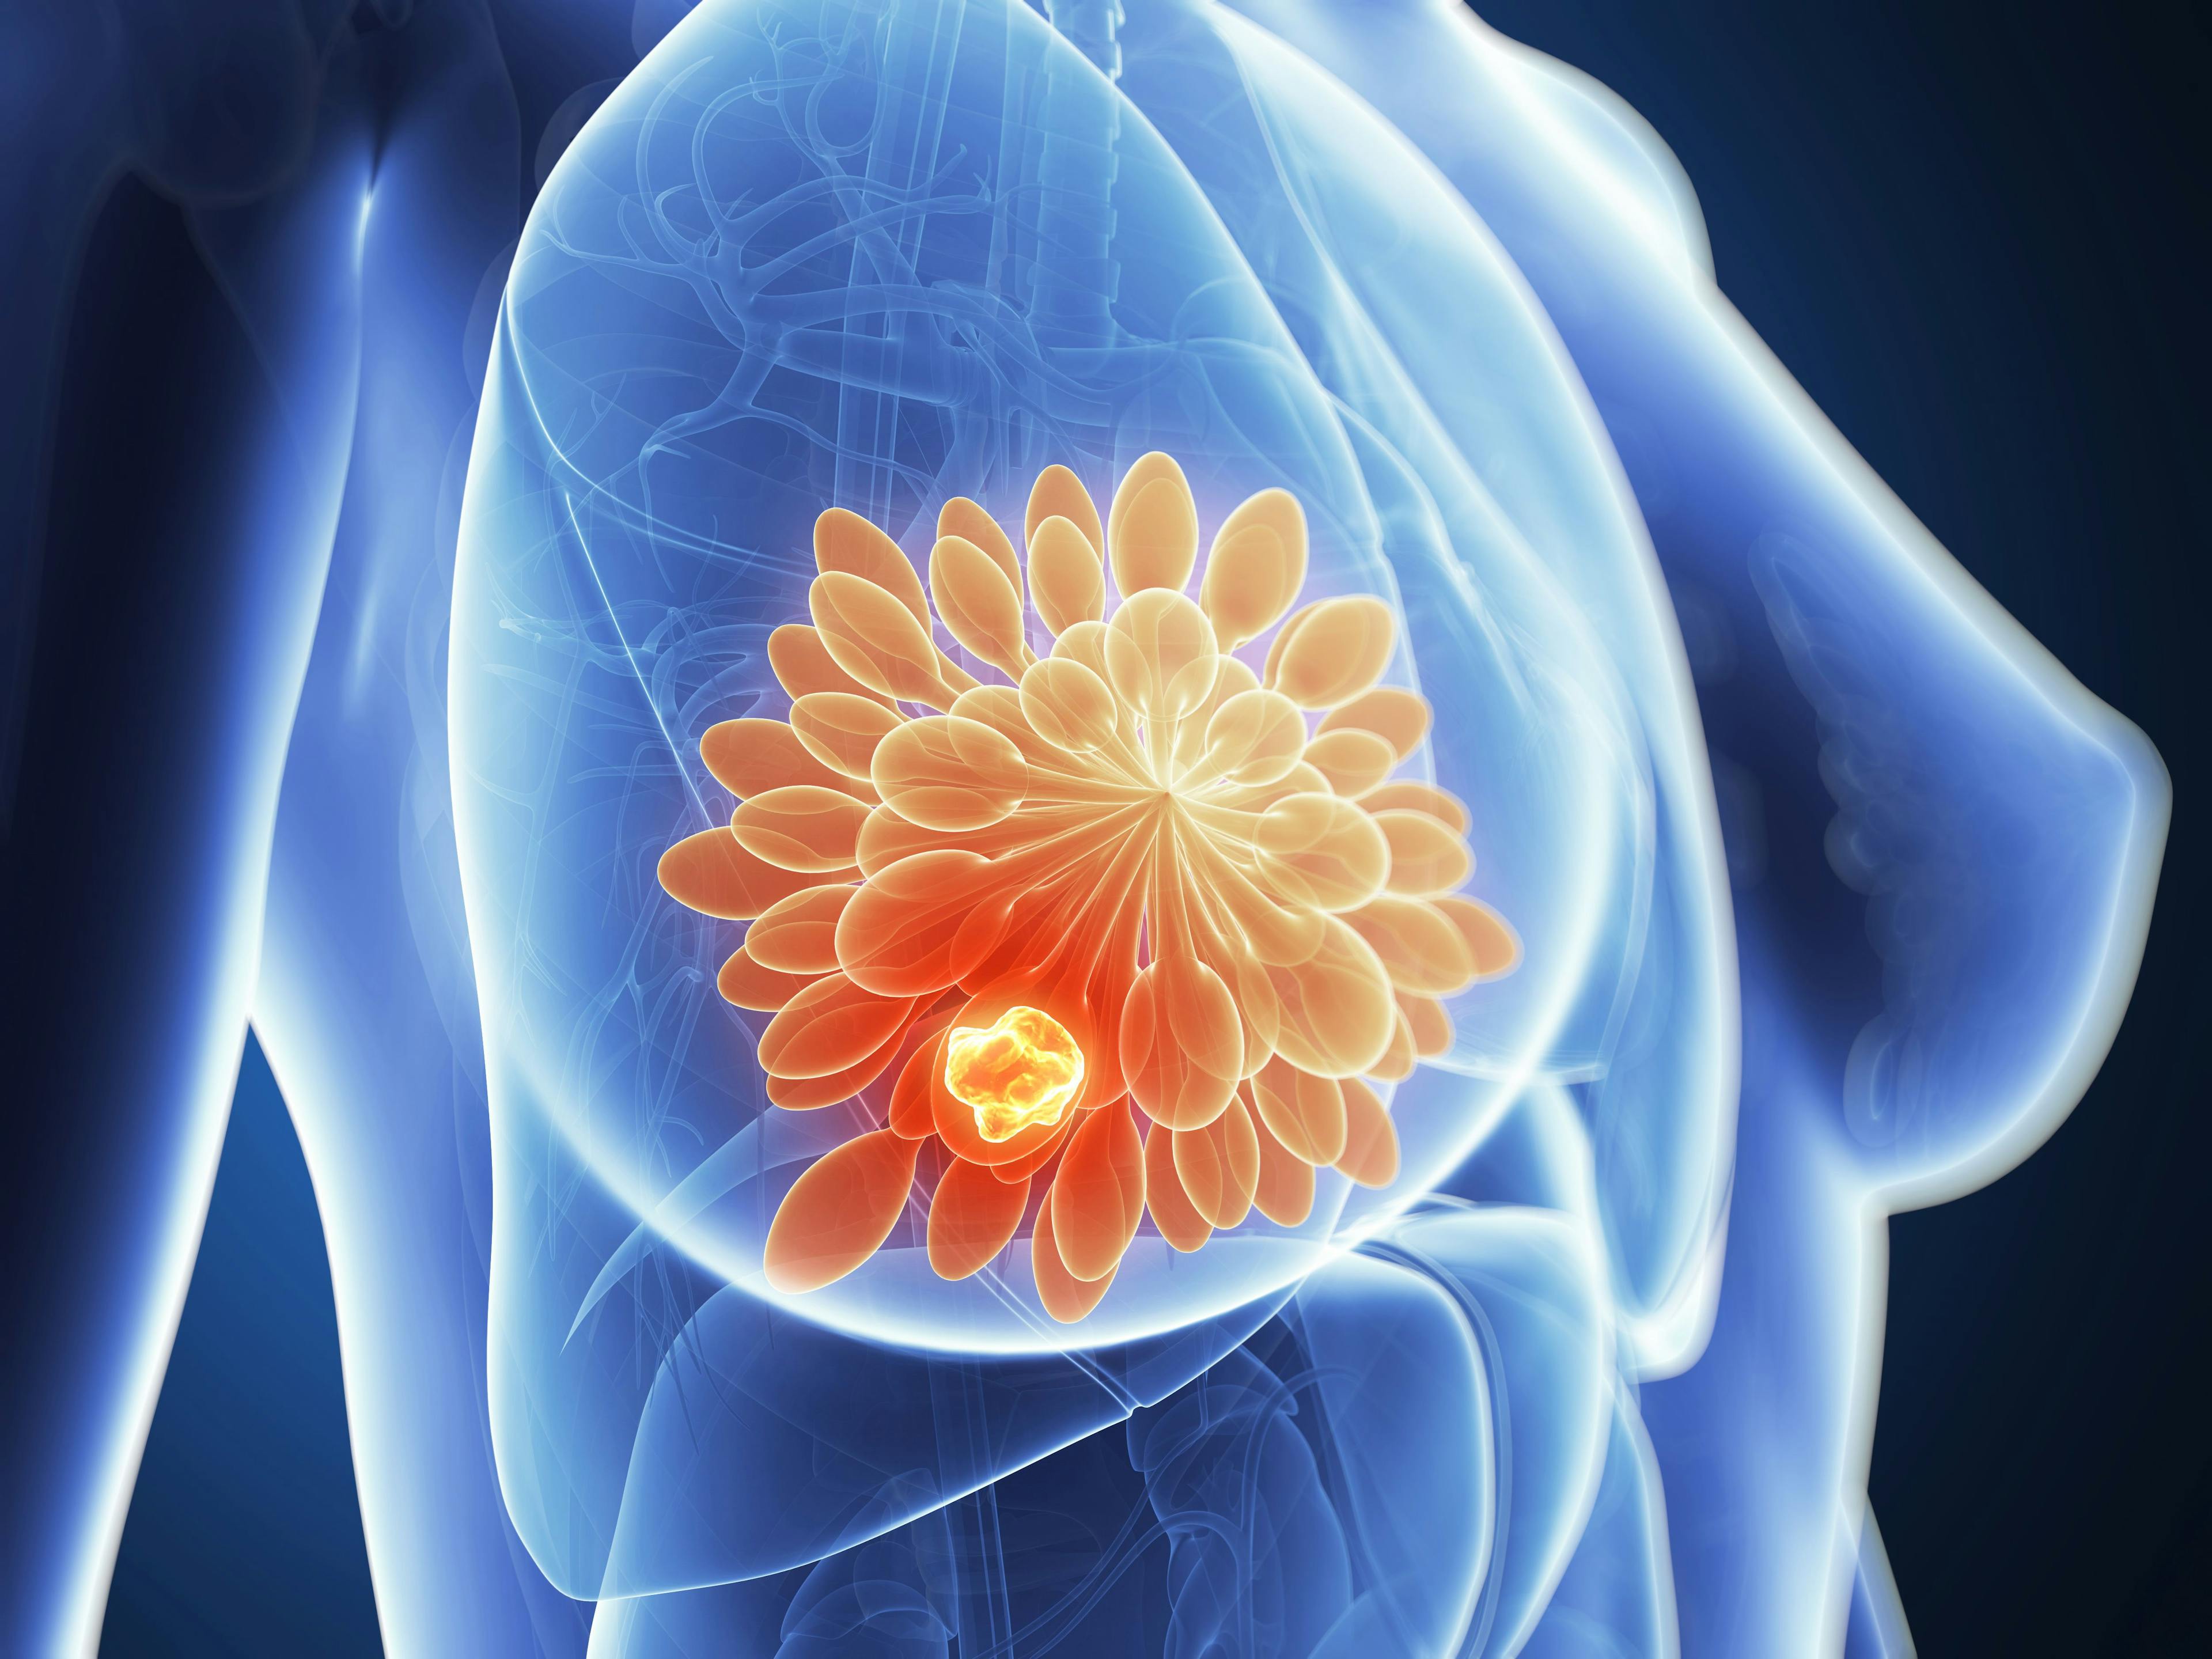 Investigators identified that early changes in standardized uptake value corrected for lean body mass may be able to predict pathologic complete response to pertuzumab AND trastuzumab in patients with HER2-positive breast cancer.